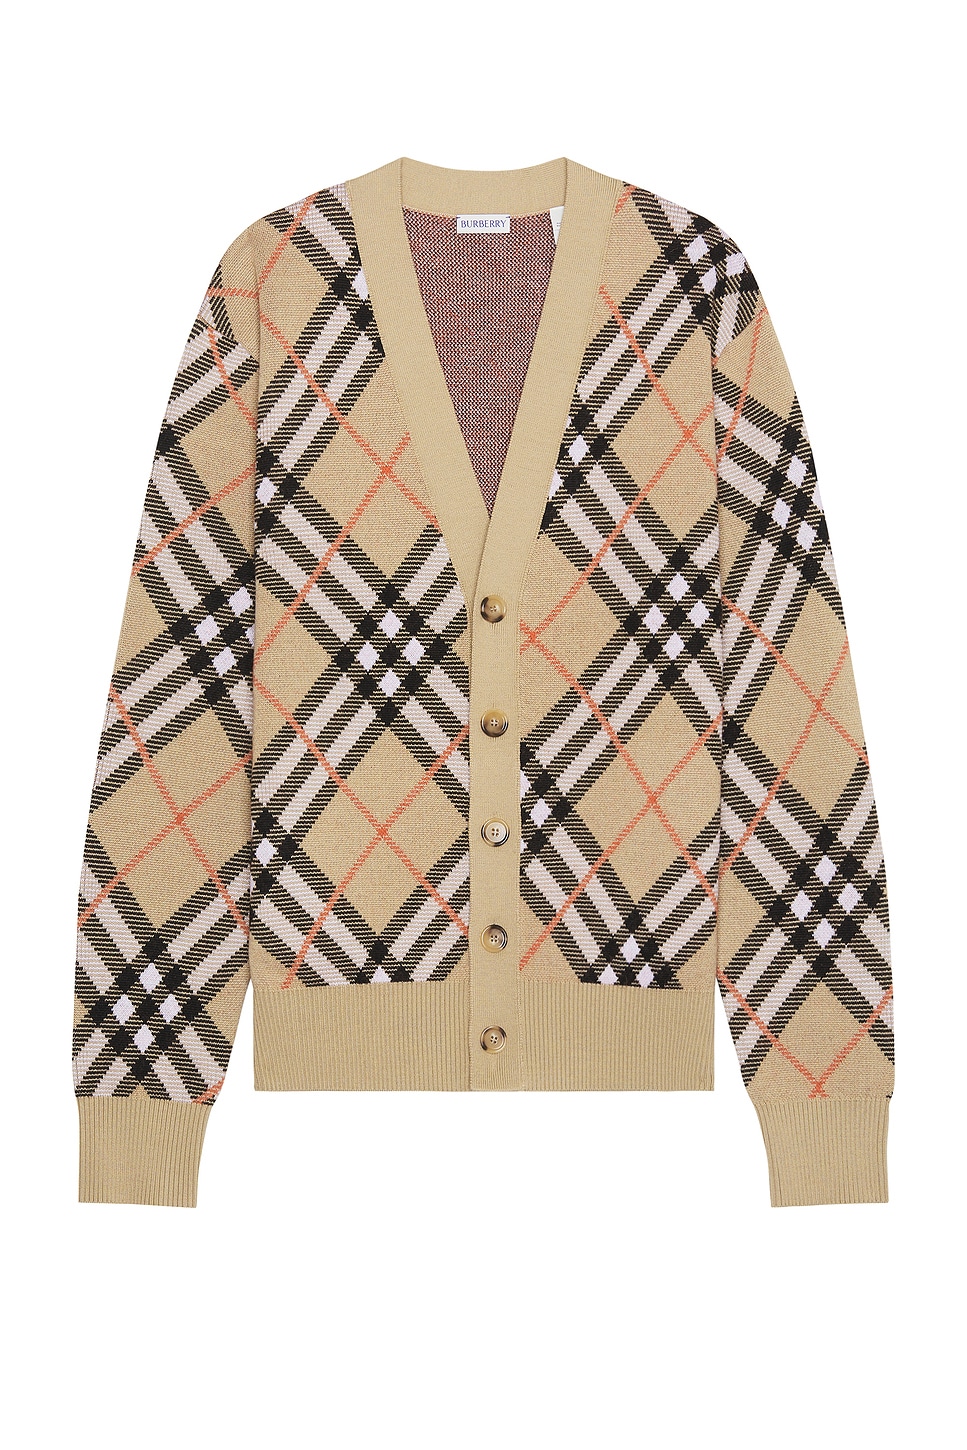 Image 1 of Burberry IP Check Cardigan in Sand Ip Check